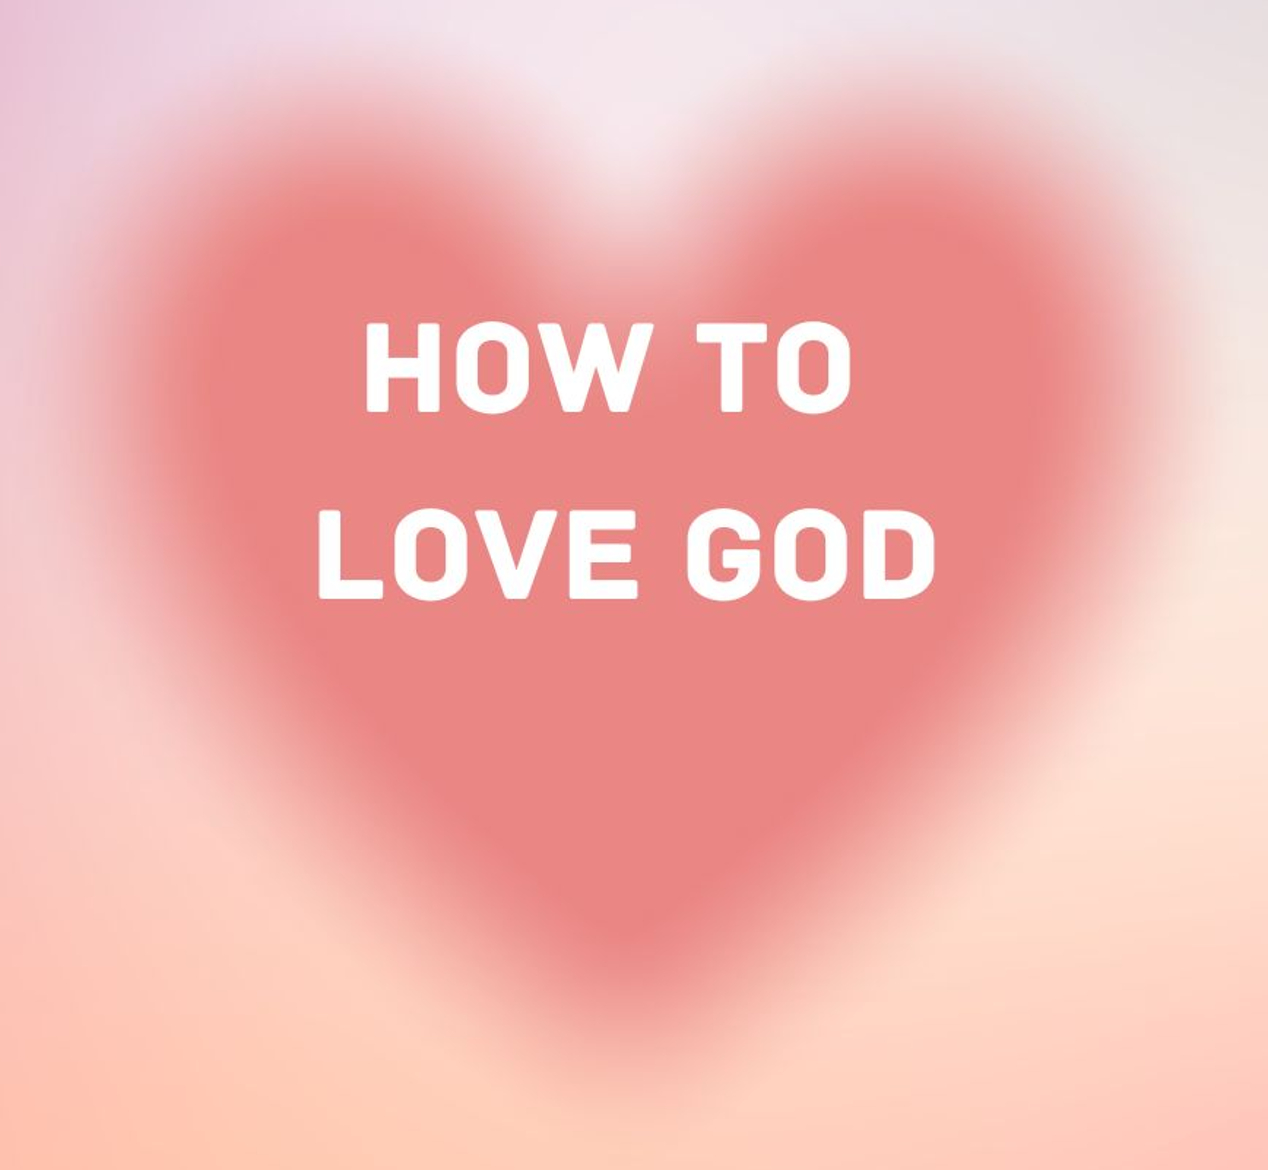 How to Love God